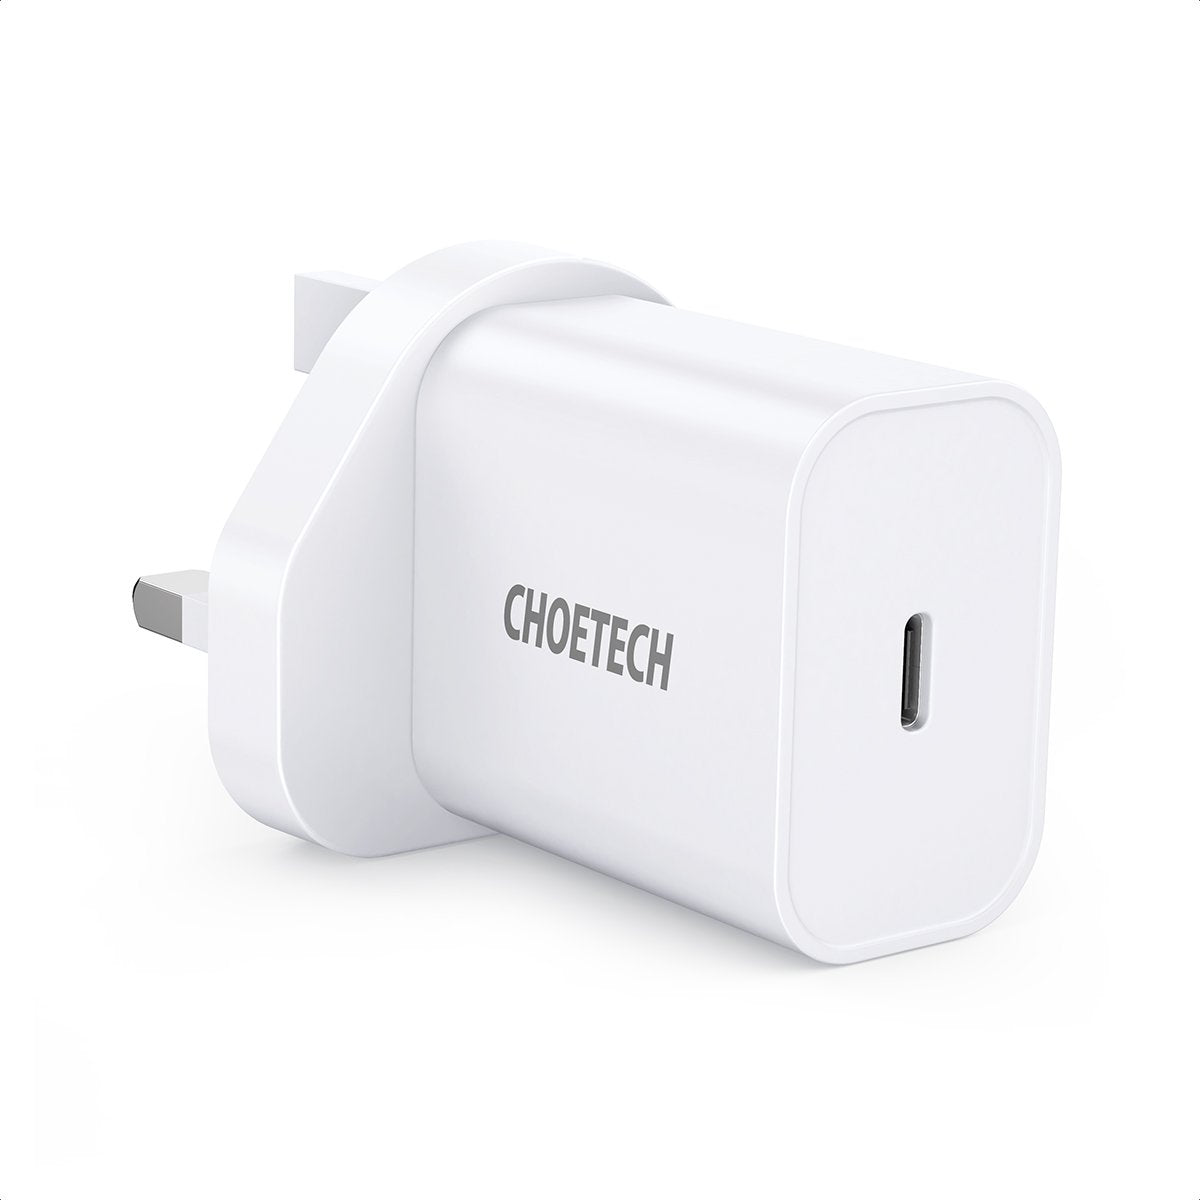 Q5004 CHOETECH PD Fast Type C Wall Charger 20W Compatible iPhone 12 Pro Max/12 Mini/11 Pro Max